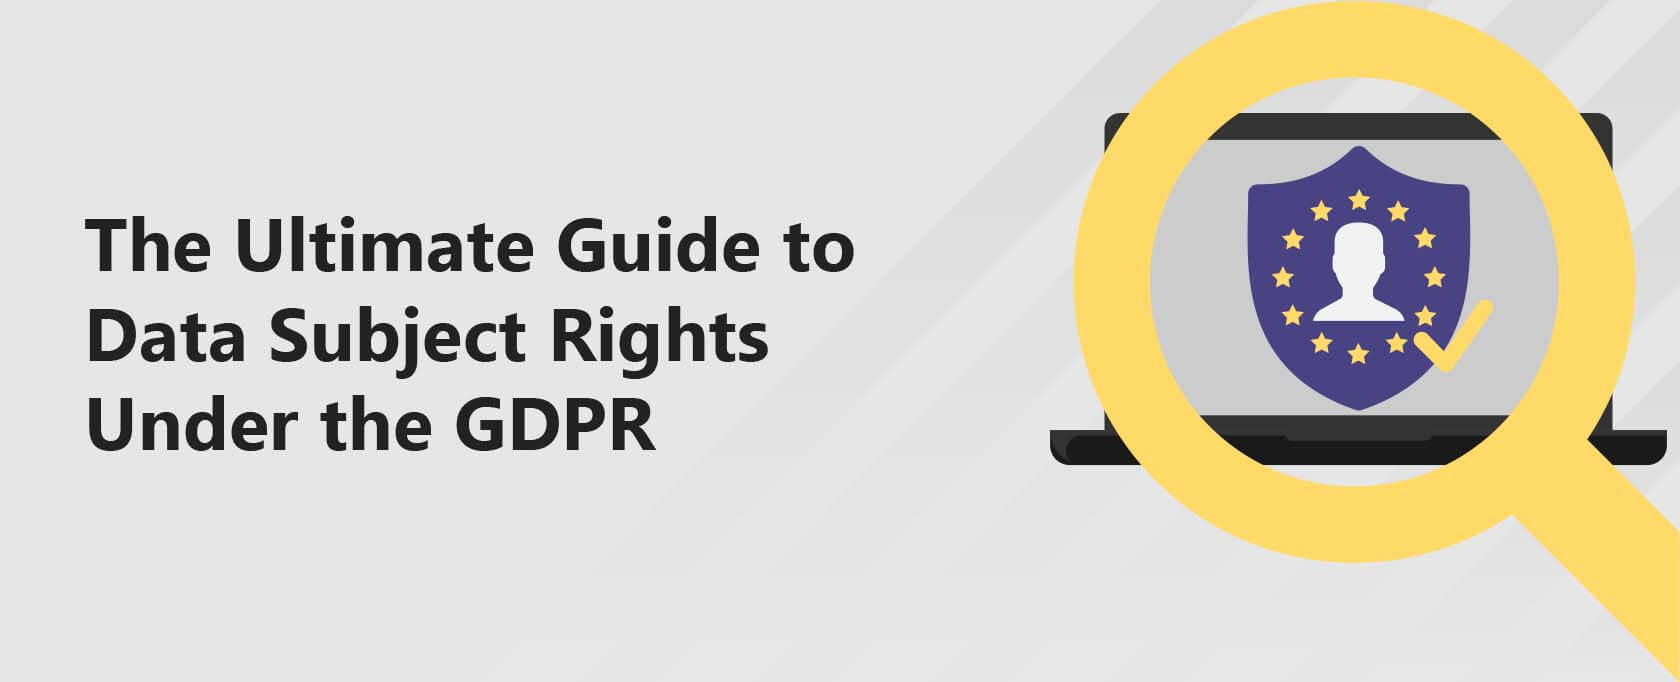 Data Subjects' Rights Under GDPR